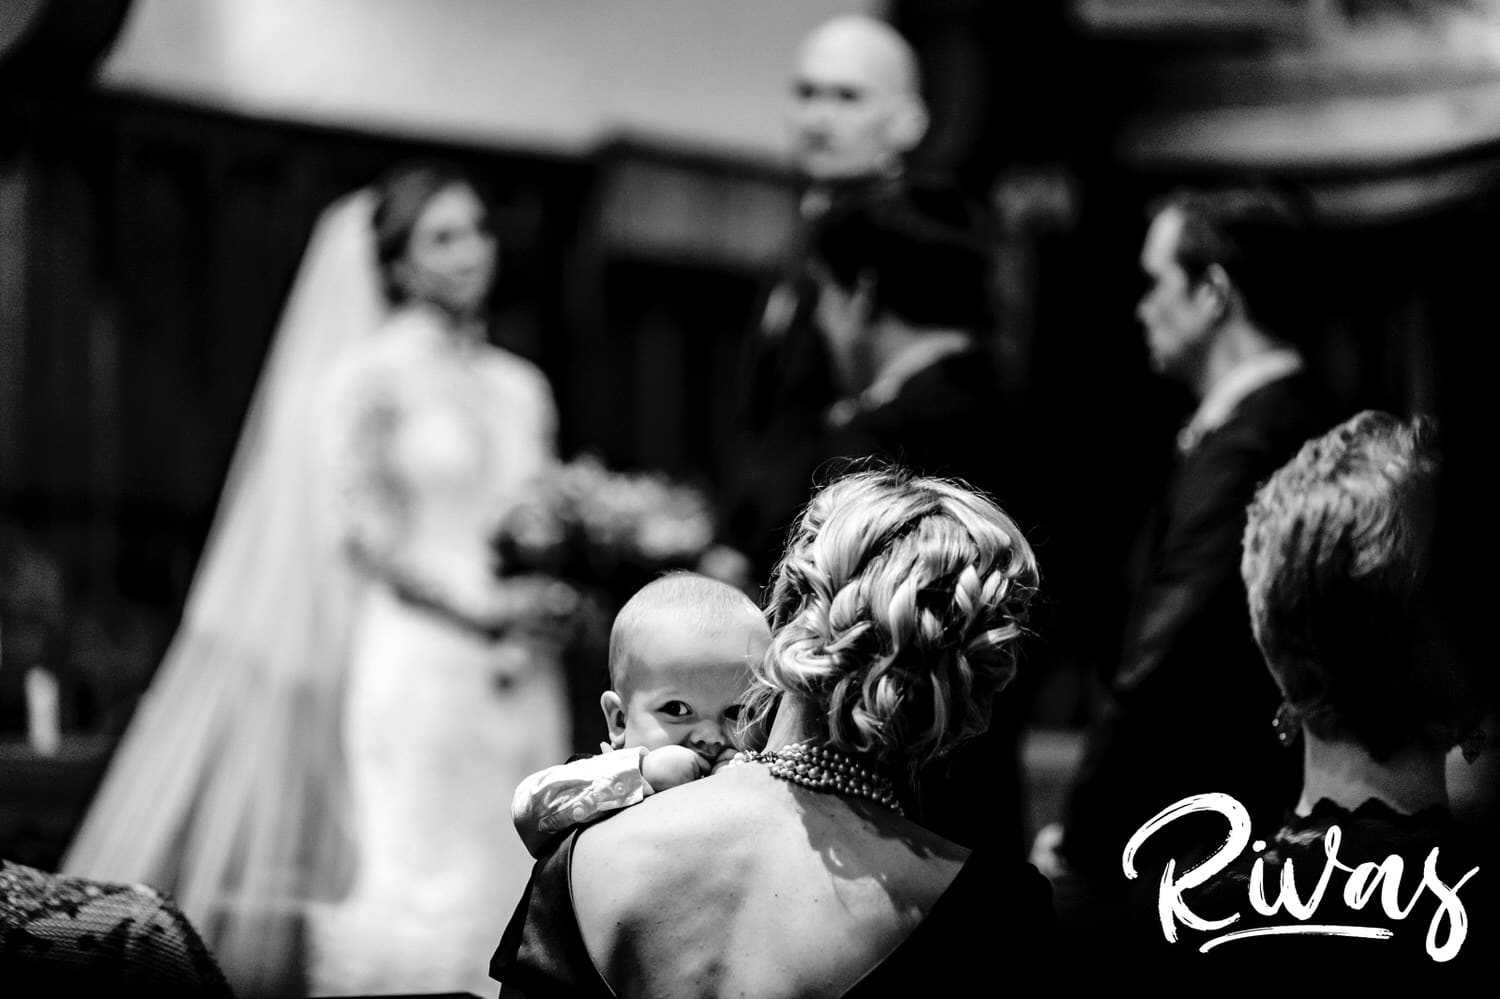 A candid black and white picture taken from a distance of a baby ring bearer chewing on his mom's pearls during a wedding ceremony with the bride and groom visible in the background. 